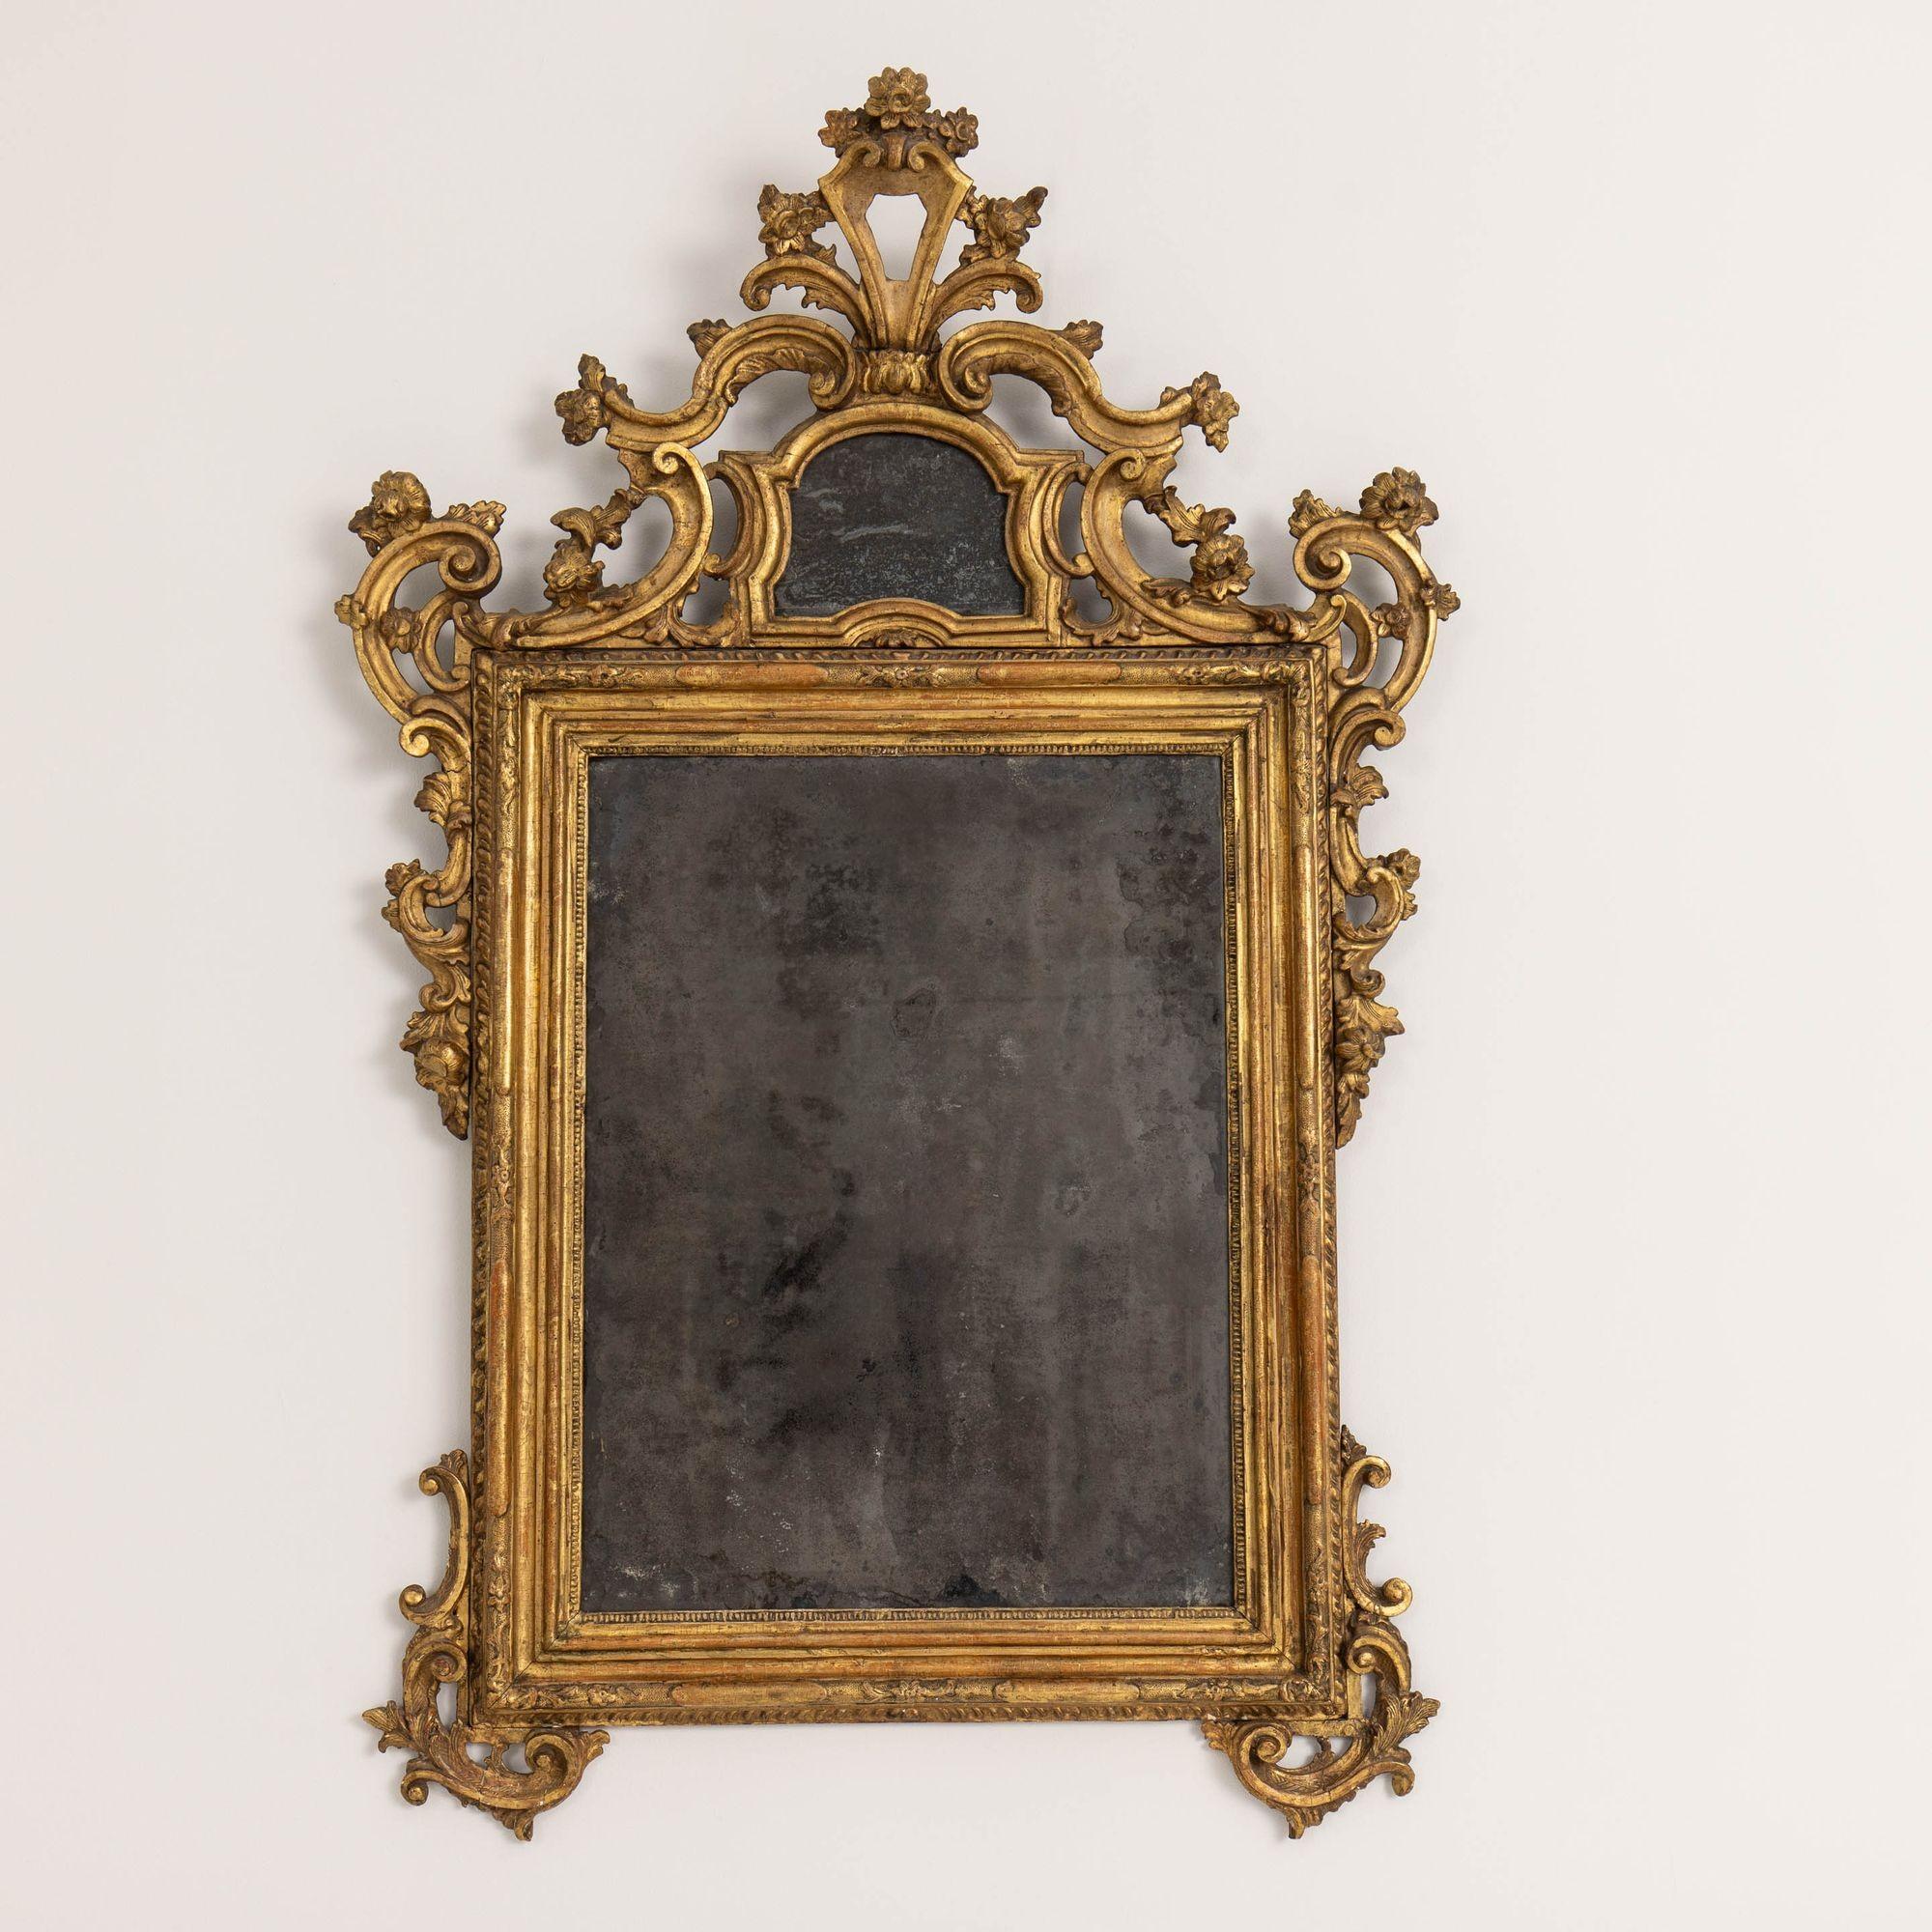 An exquisite 18th century Venetian mirror from the Baroque period with beautifully aged, original giltwood and mercury plates, circa 1740. Standing on two scrolled feet with finely carved, pierced, scrolling motifs of flowers and acanthus leaves